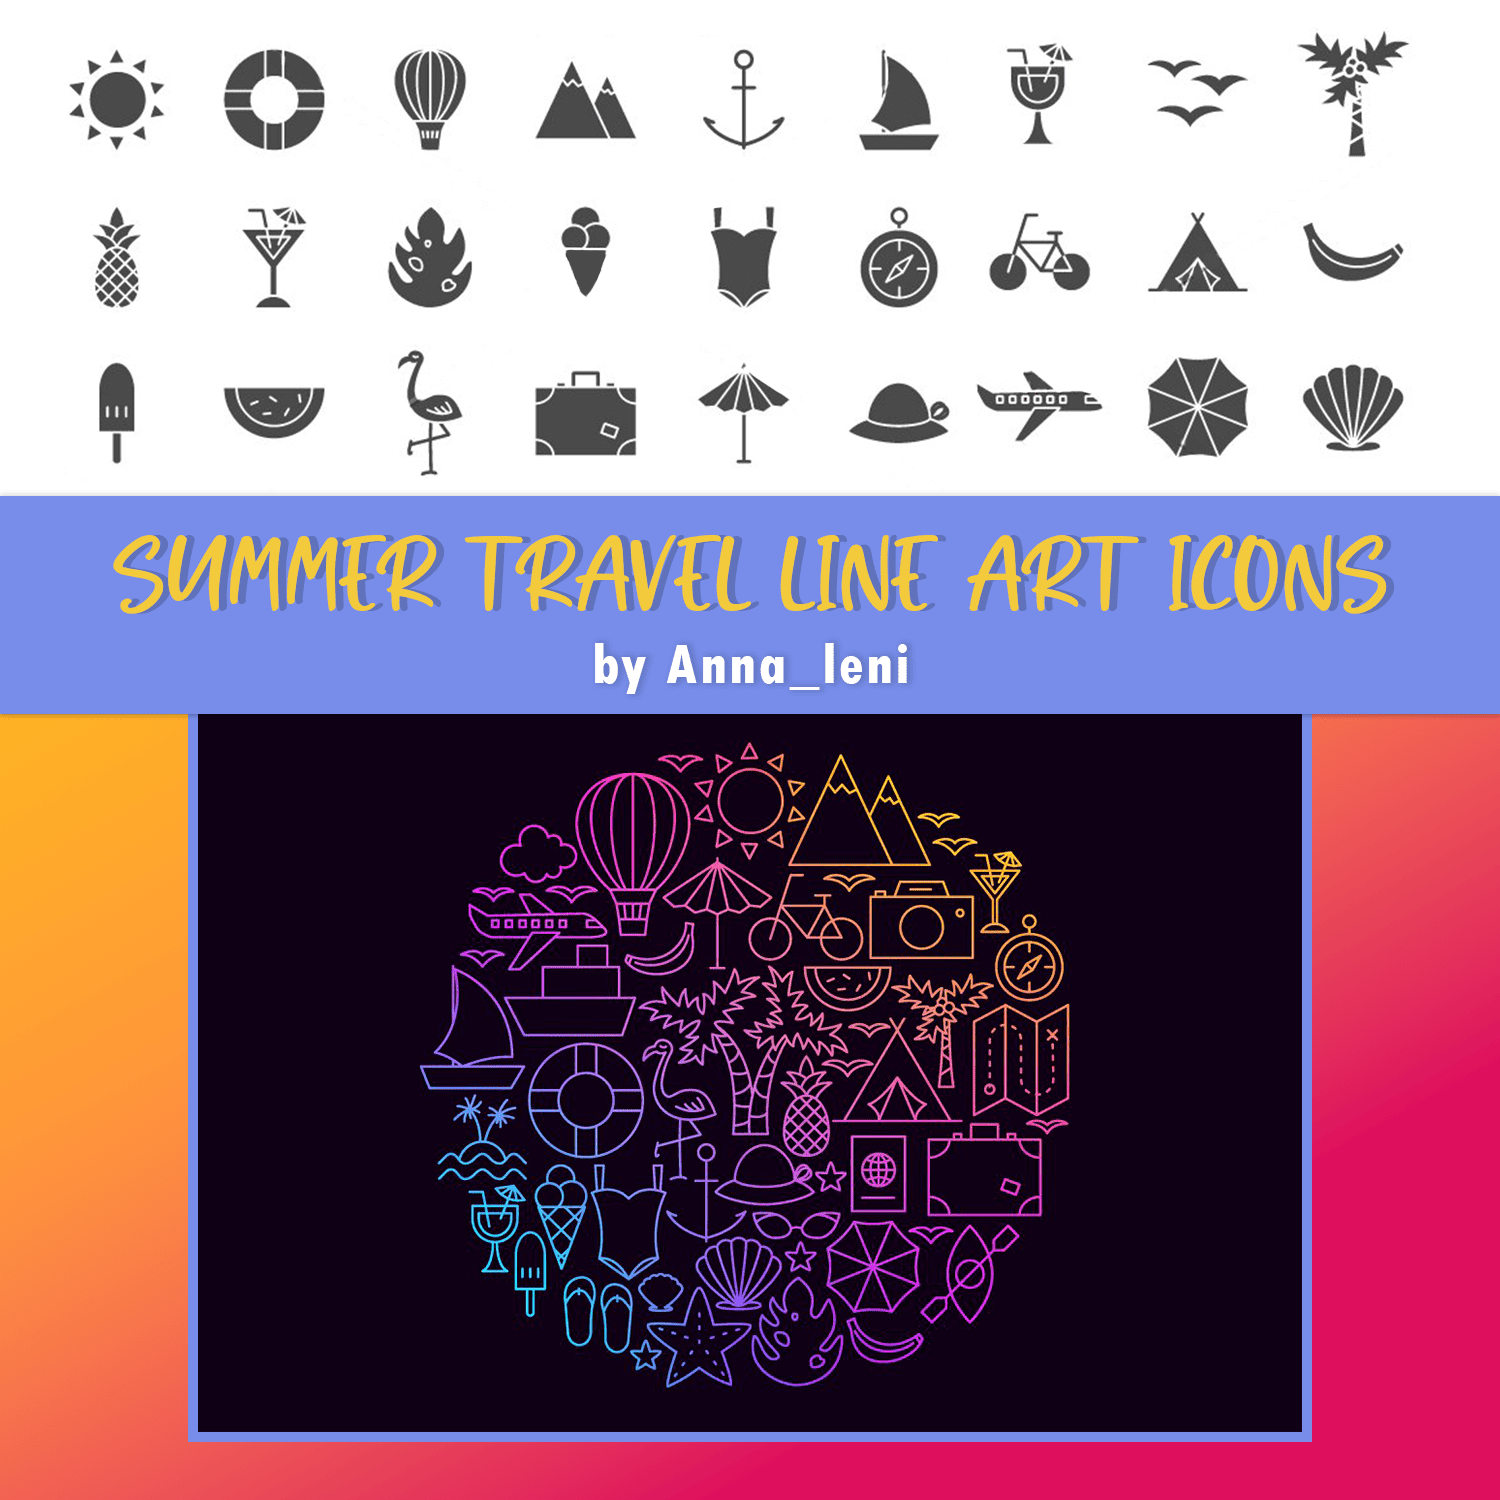 Summer Travel Line Art Icons cover.